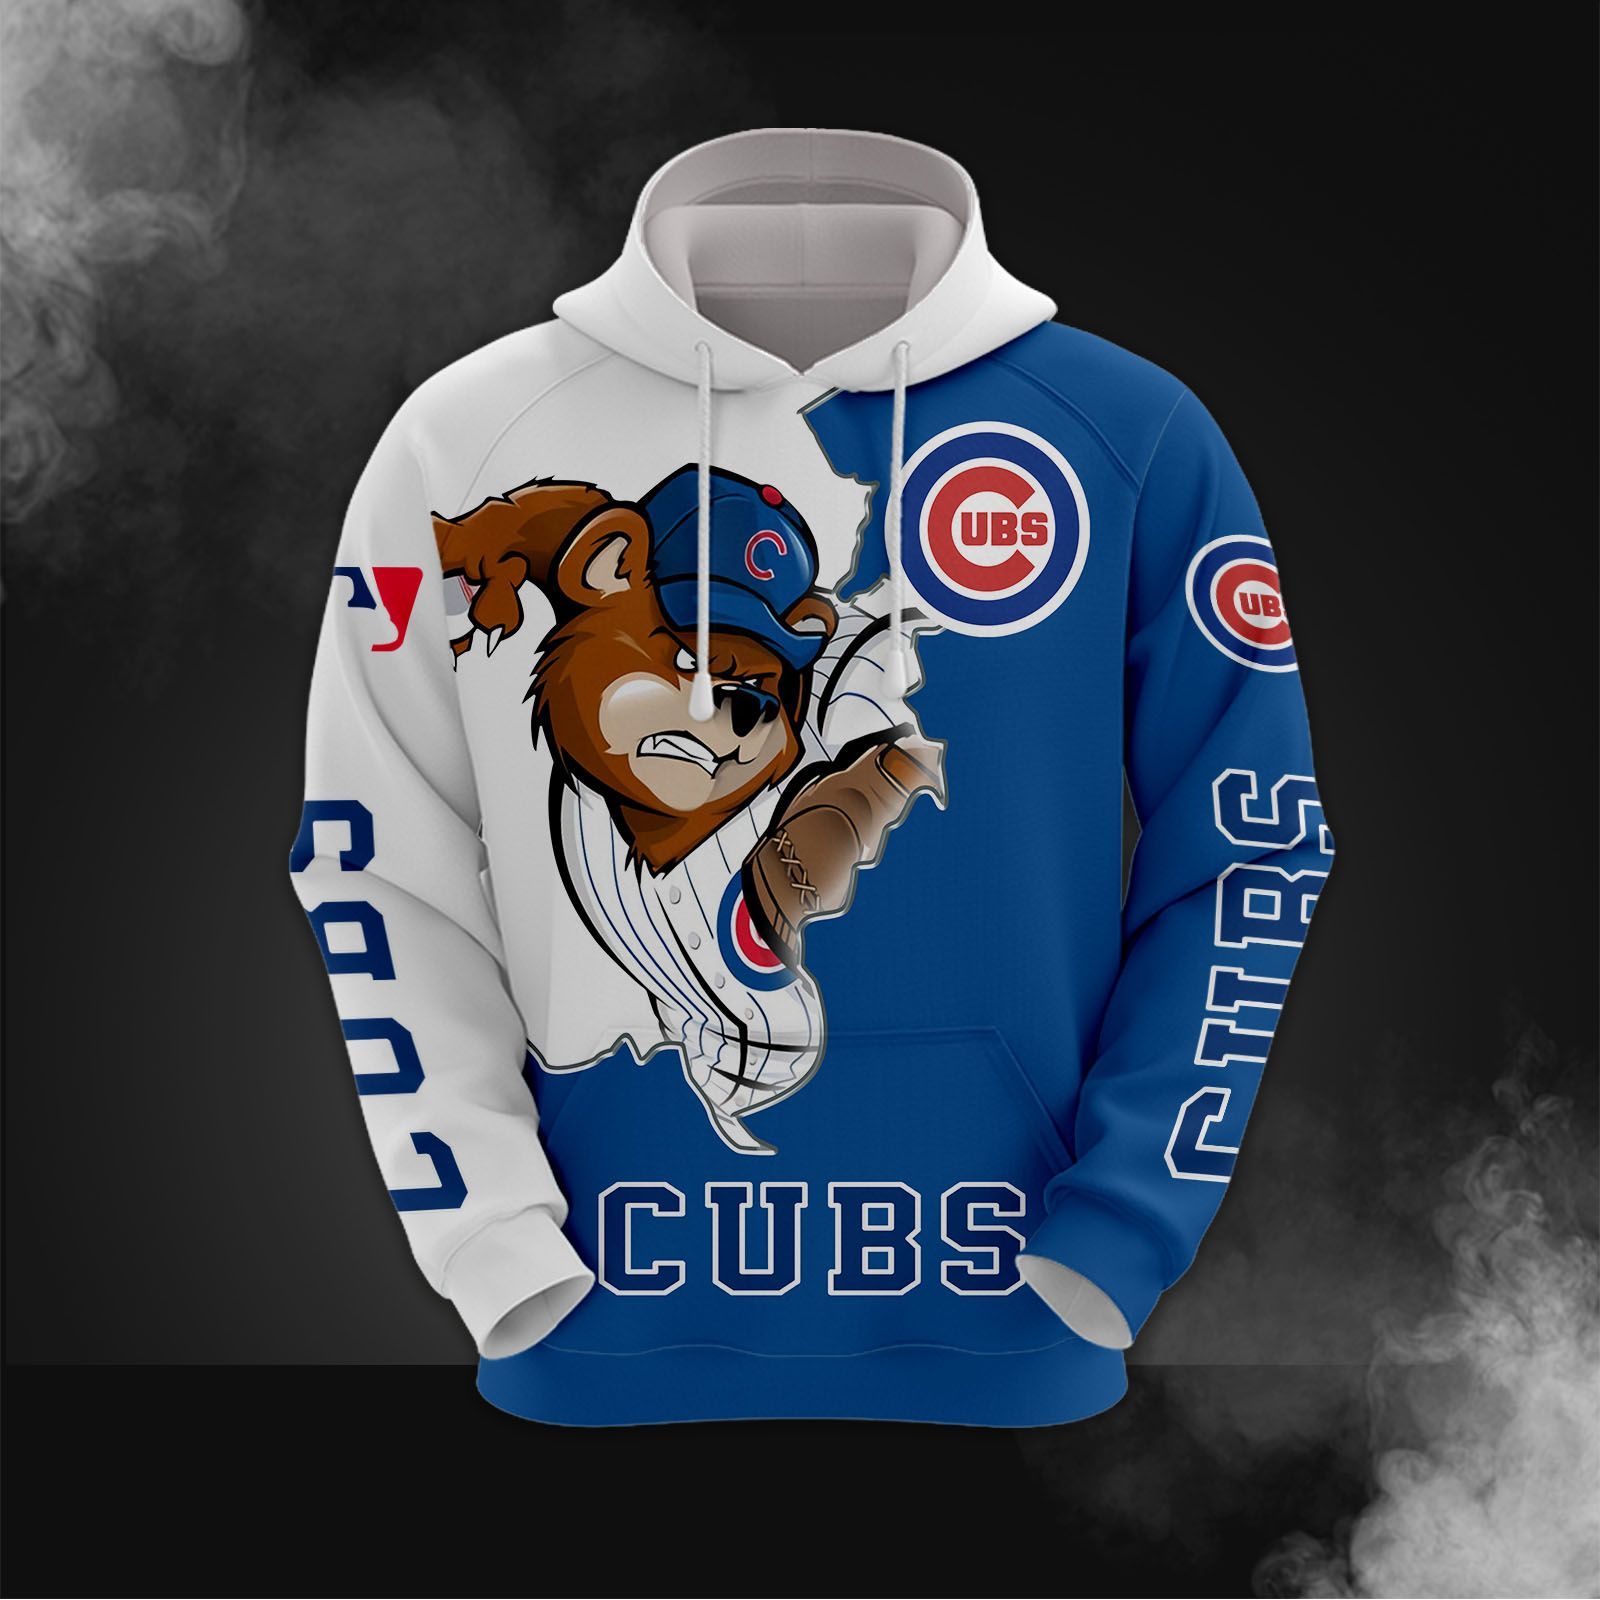 Chicago Cubs Printing T-Shirt, Polo, Hoodie, Zip, Bomber 7000